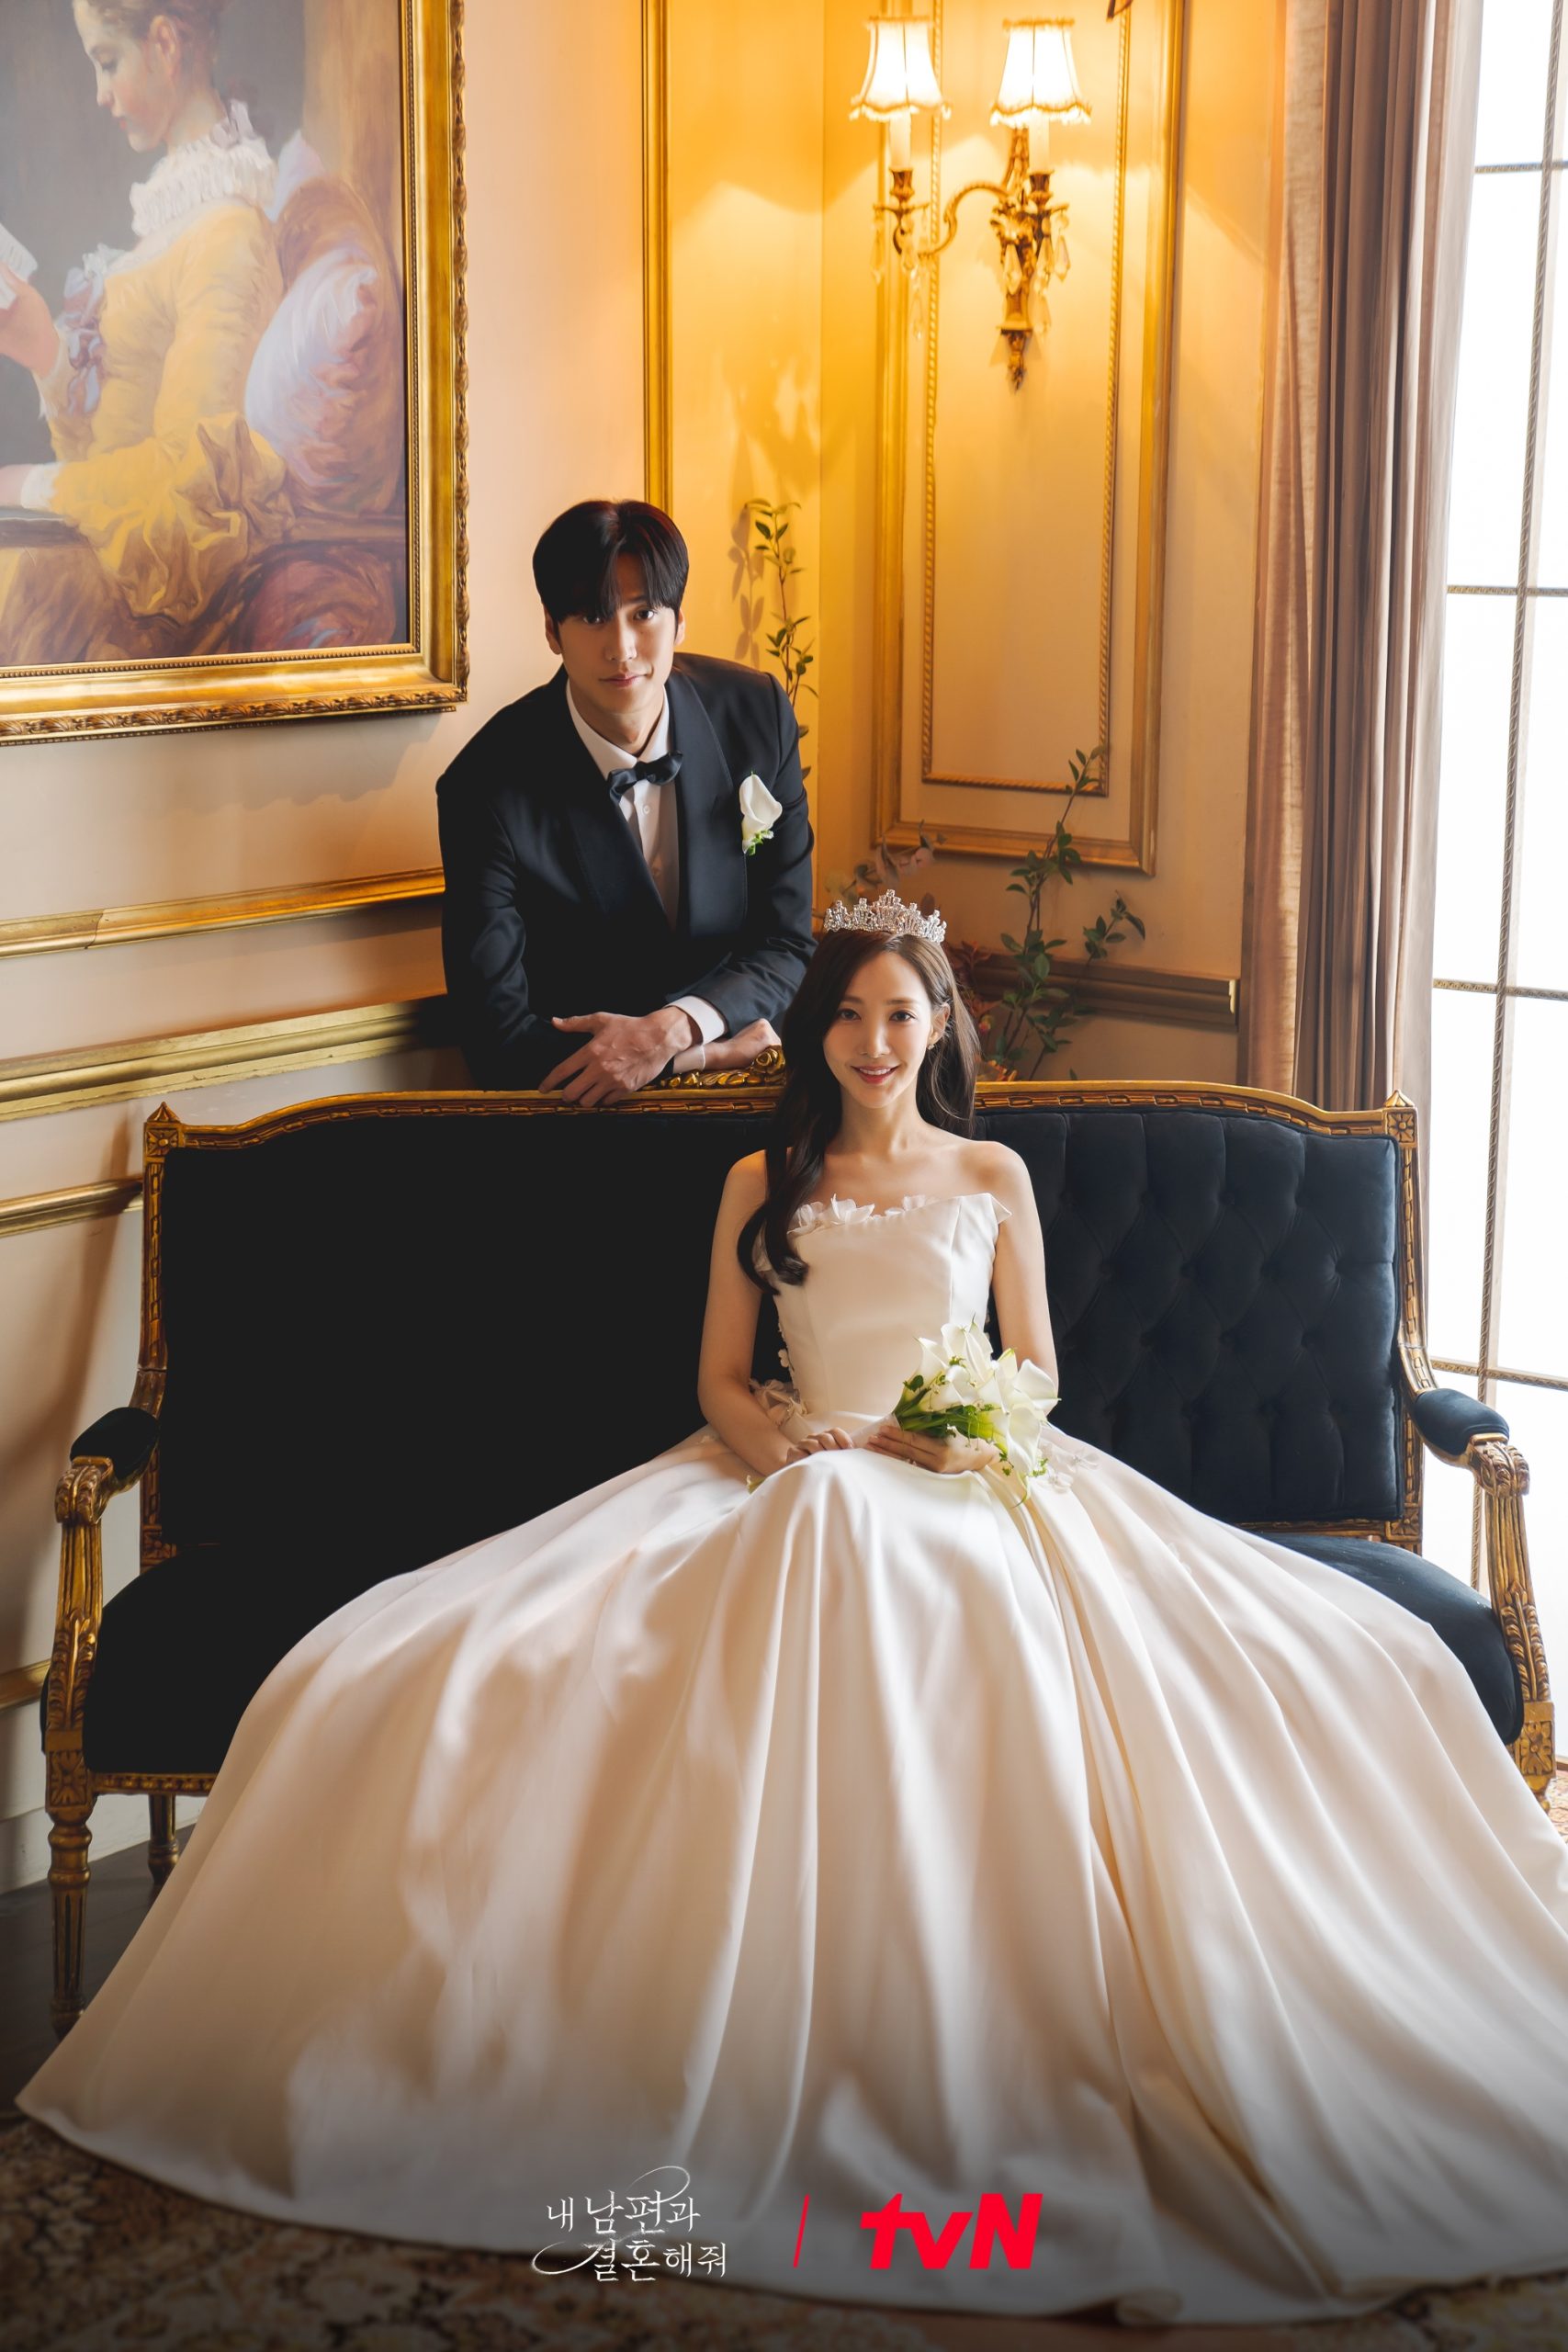 Marry My Husband | Na In Woo | Park Min Young |  Pics Credit: tvN's Official